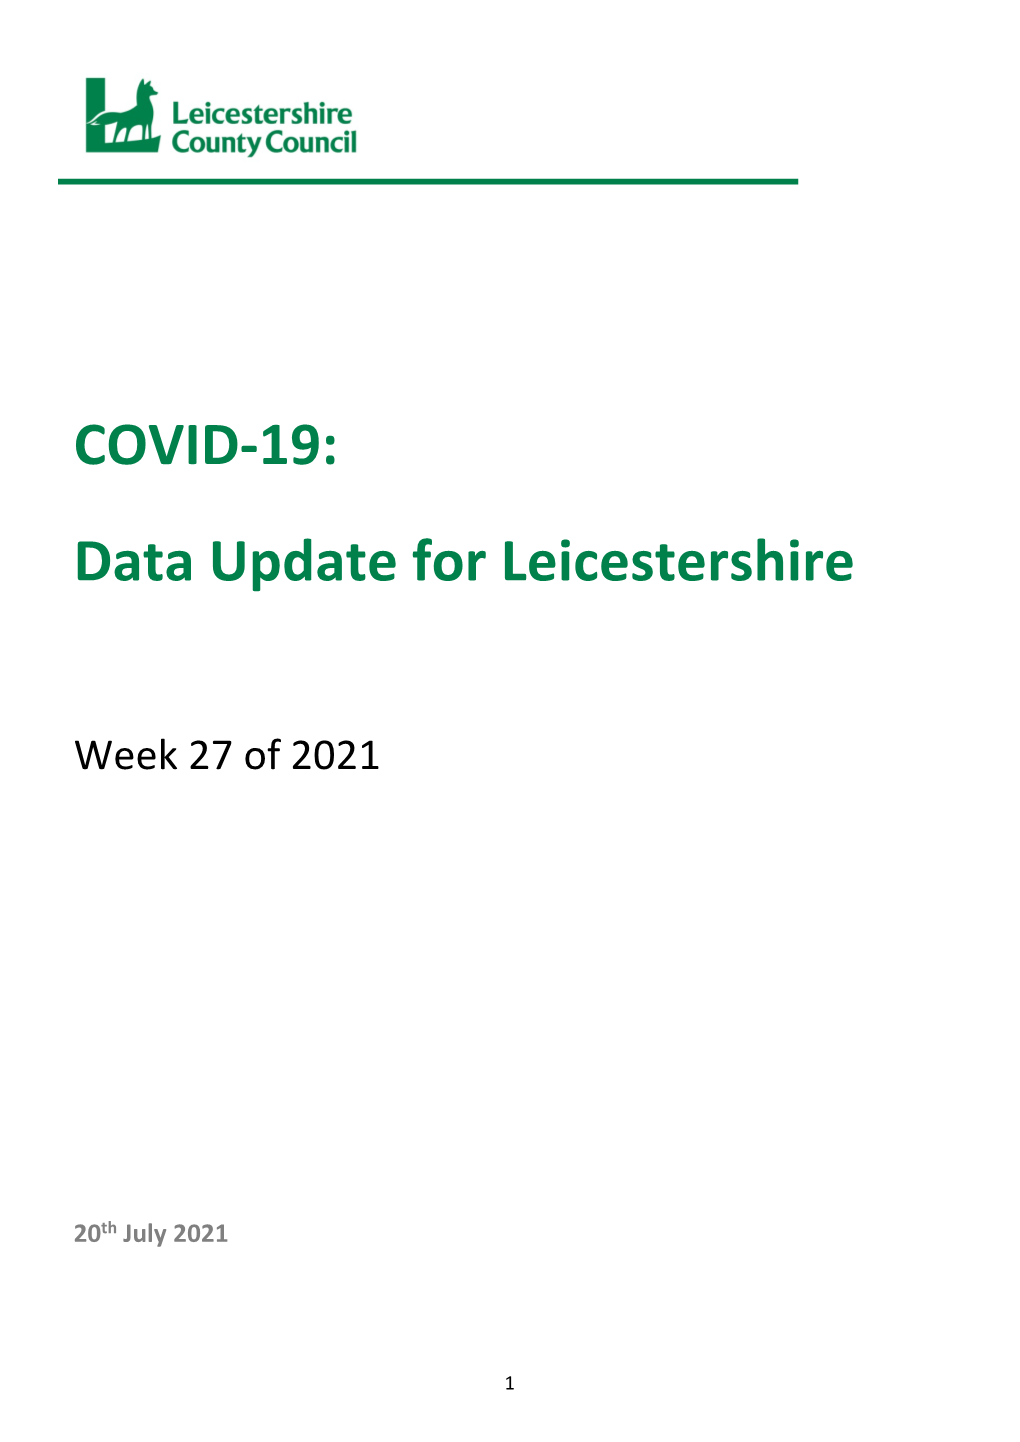 COVID-19: Data Update for Leicestershire (Week 27 of 2021)